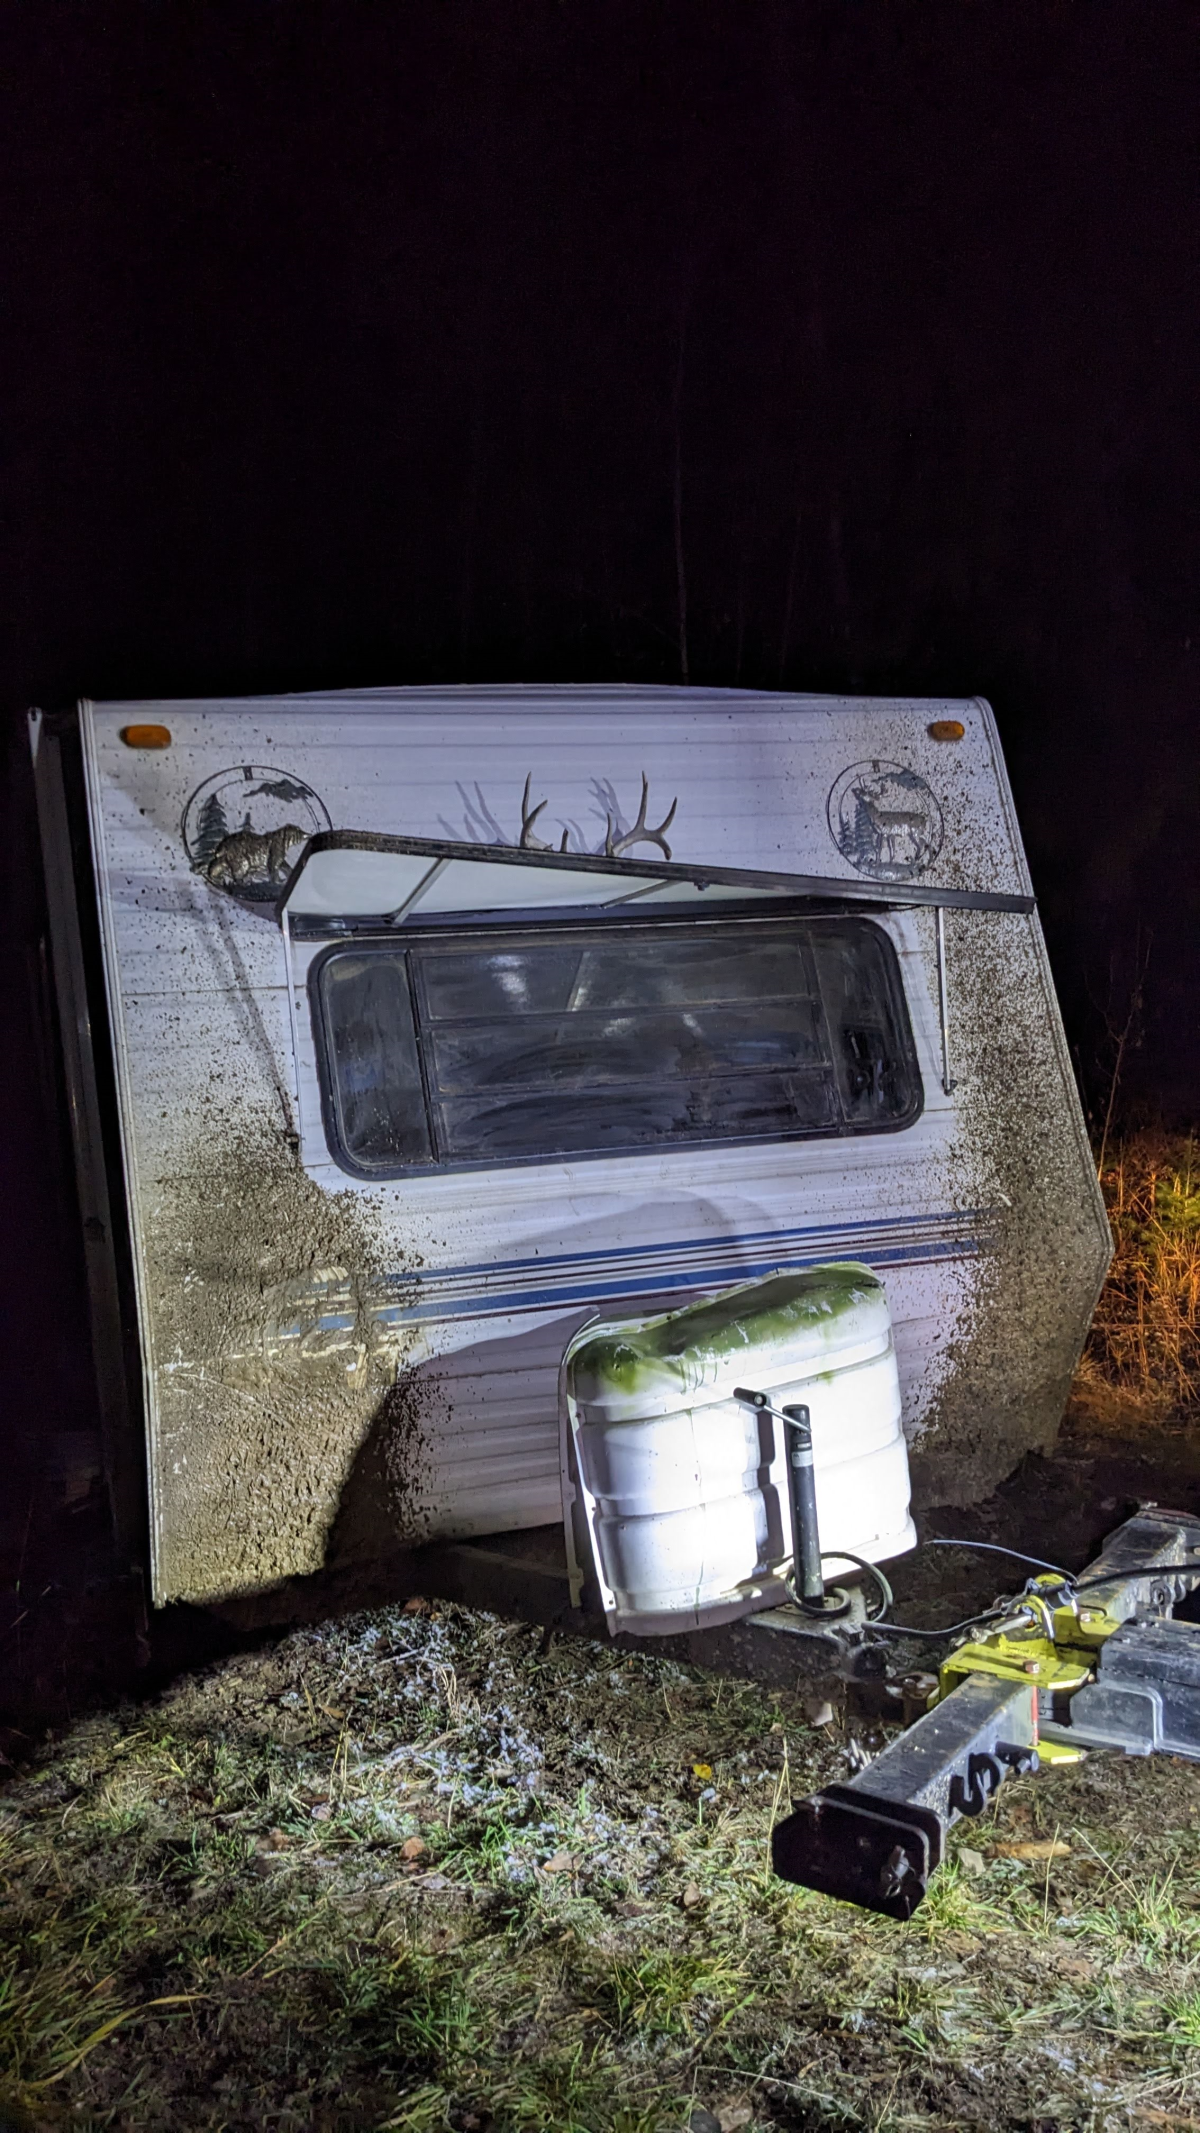 cats seen falling from moving b.c. travel trailer prompts police response, 20 rescued